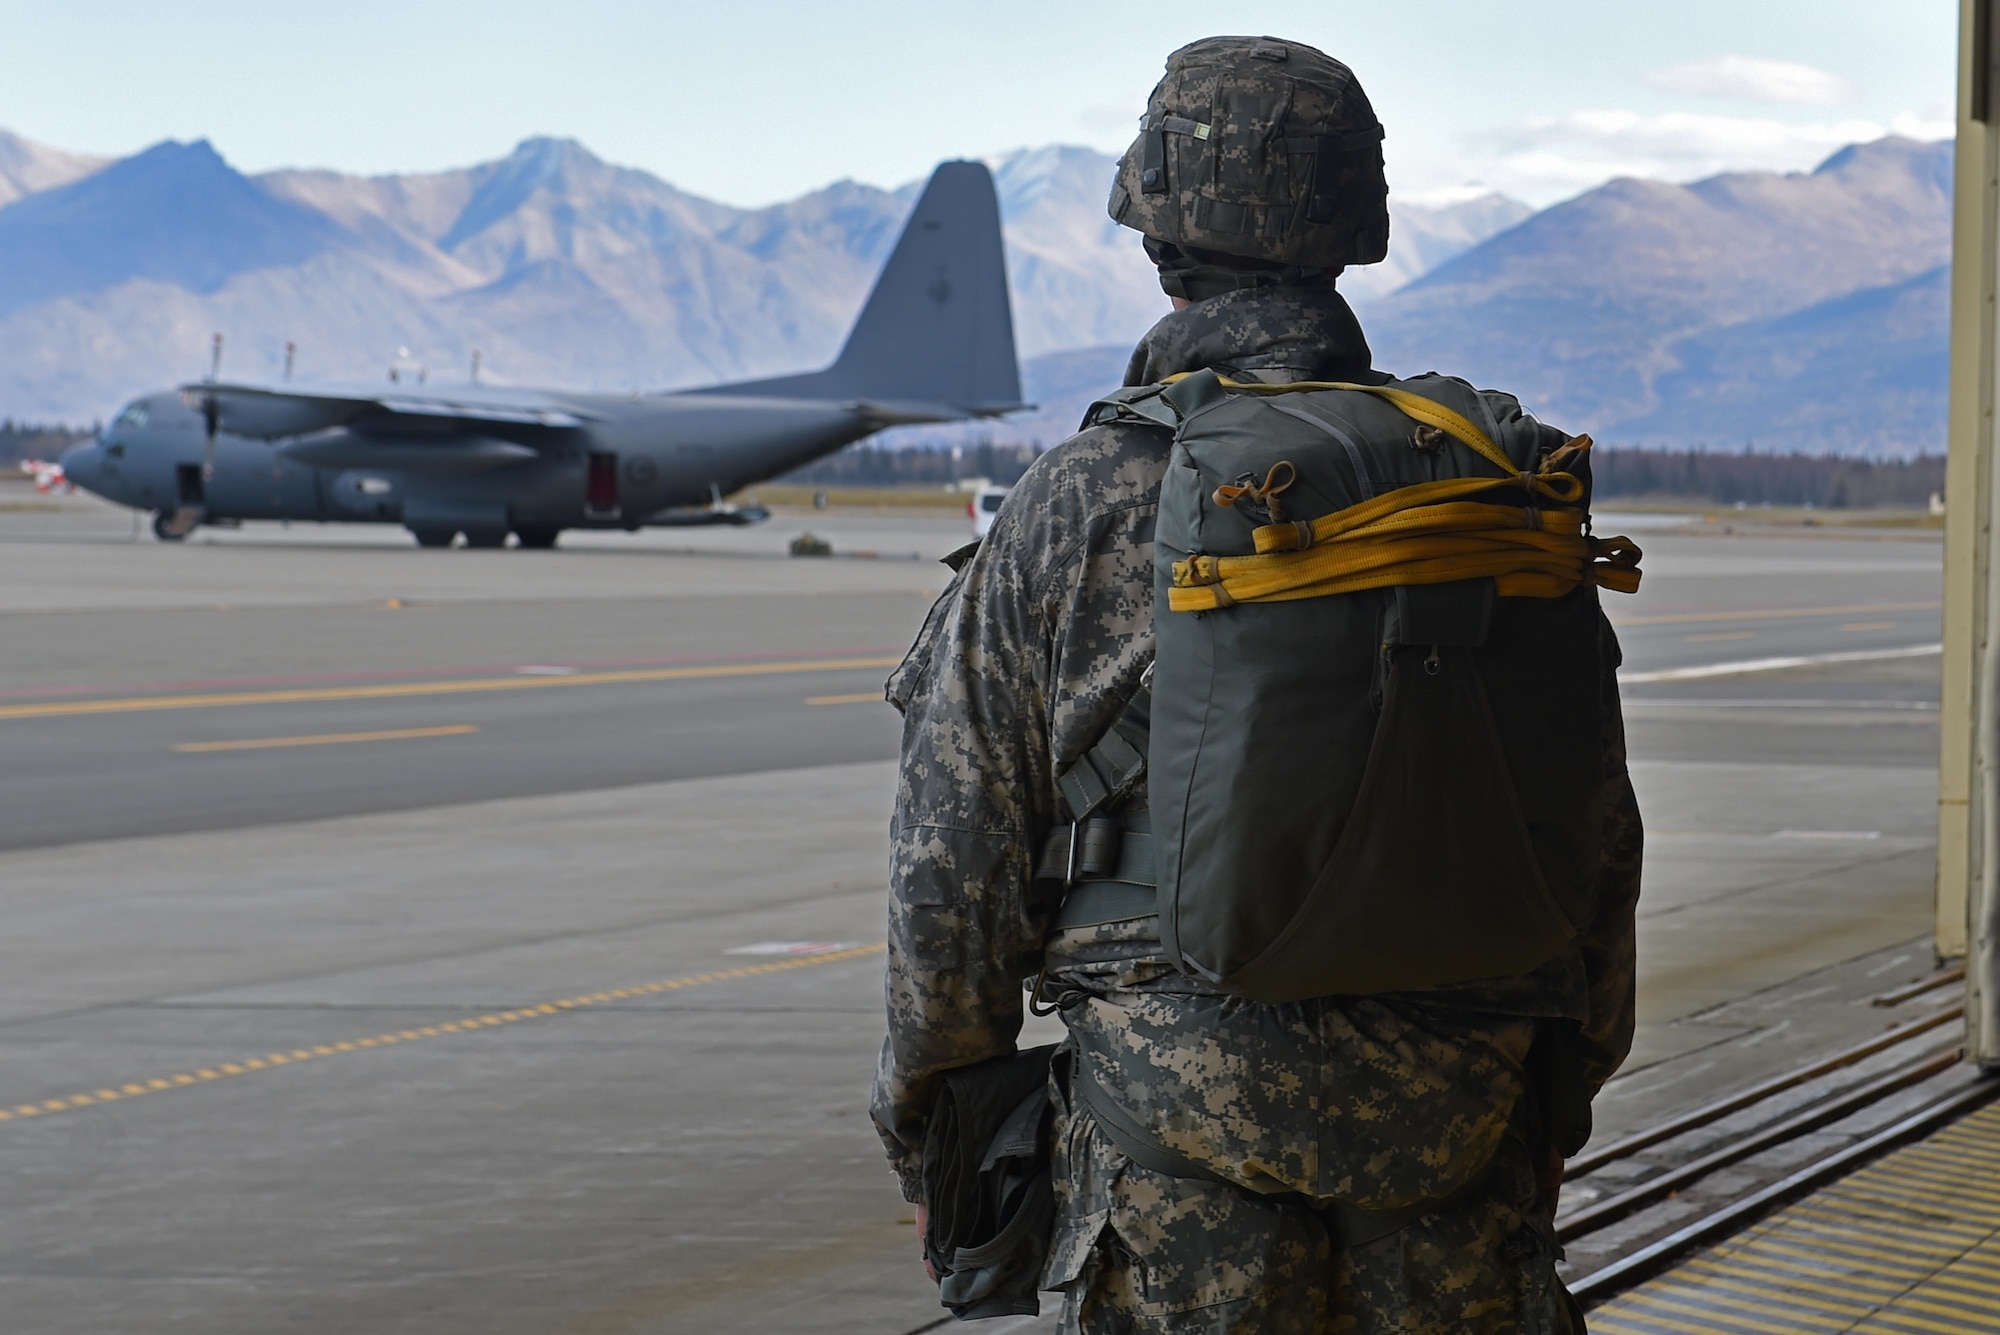 A paratrooper with the 4th Infantry Brigade Combat Team (Airborne), 25th Infantry Division, U.S. Army Alaska, observes a Royal New Zealand Air Force C-130 Hercules before boarding for a jump during Red-Flag Alaska 17-1 at Joint Base Elmendorf-Richardson, Alaska, Oct. 12, 2016. Red-Flag Alaska 17-1 provides joint offensive counter-air, interdiction, close air support, and large force employment training in a simulated combat environment. 